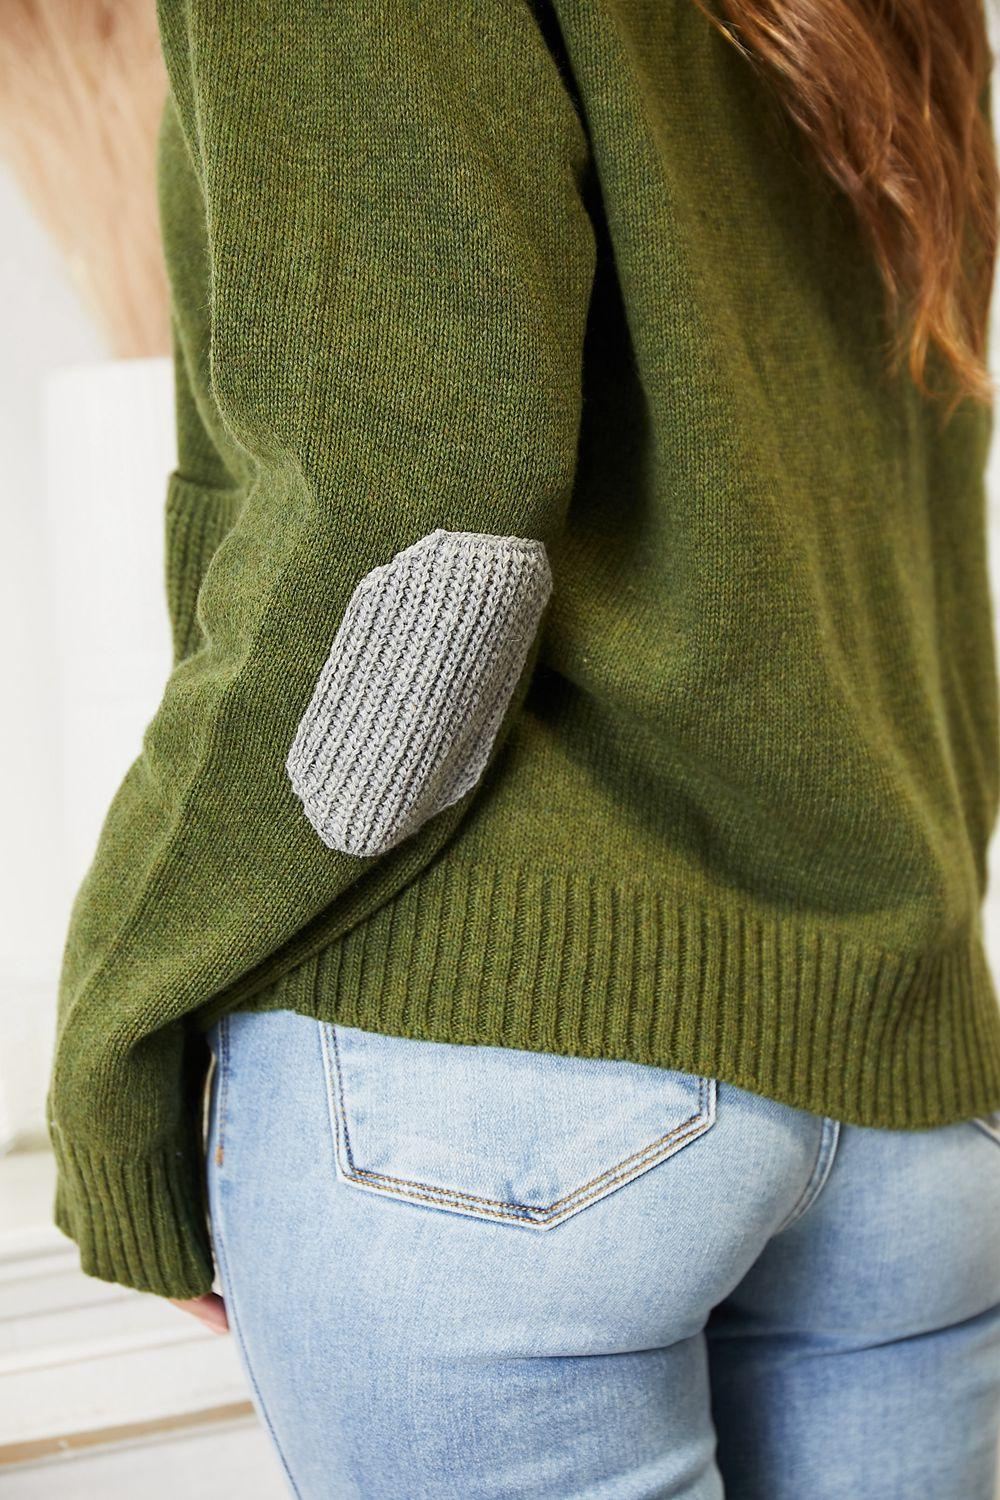 Oversized Cardigan Sweater - Green - Elbow Patch - Inspired Eye Boutique